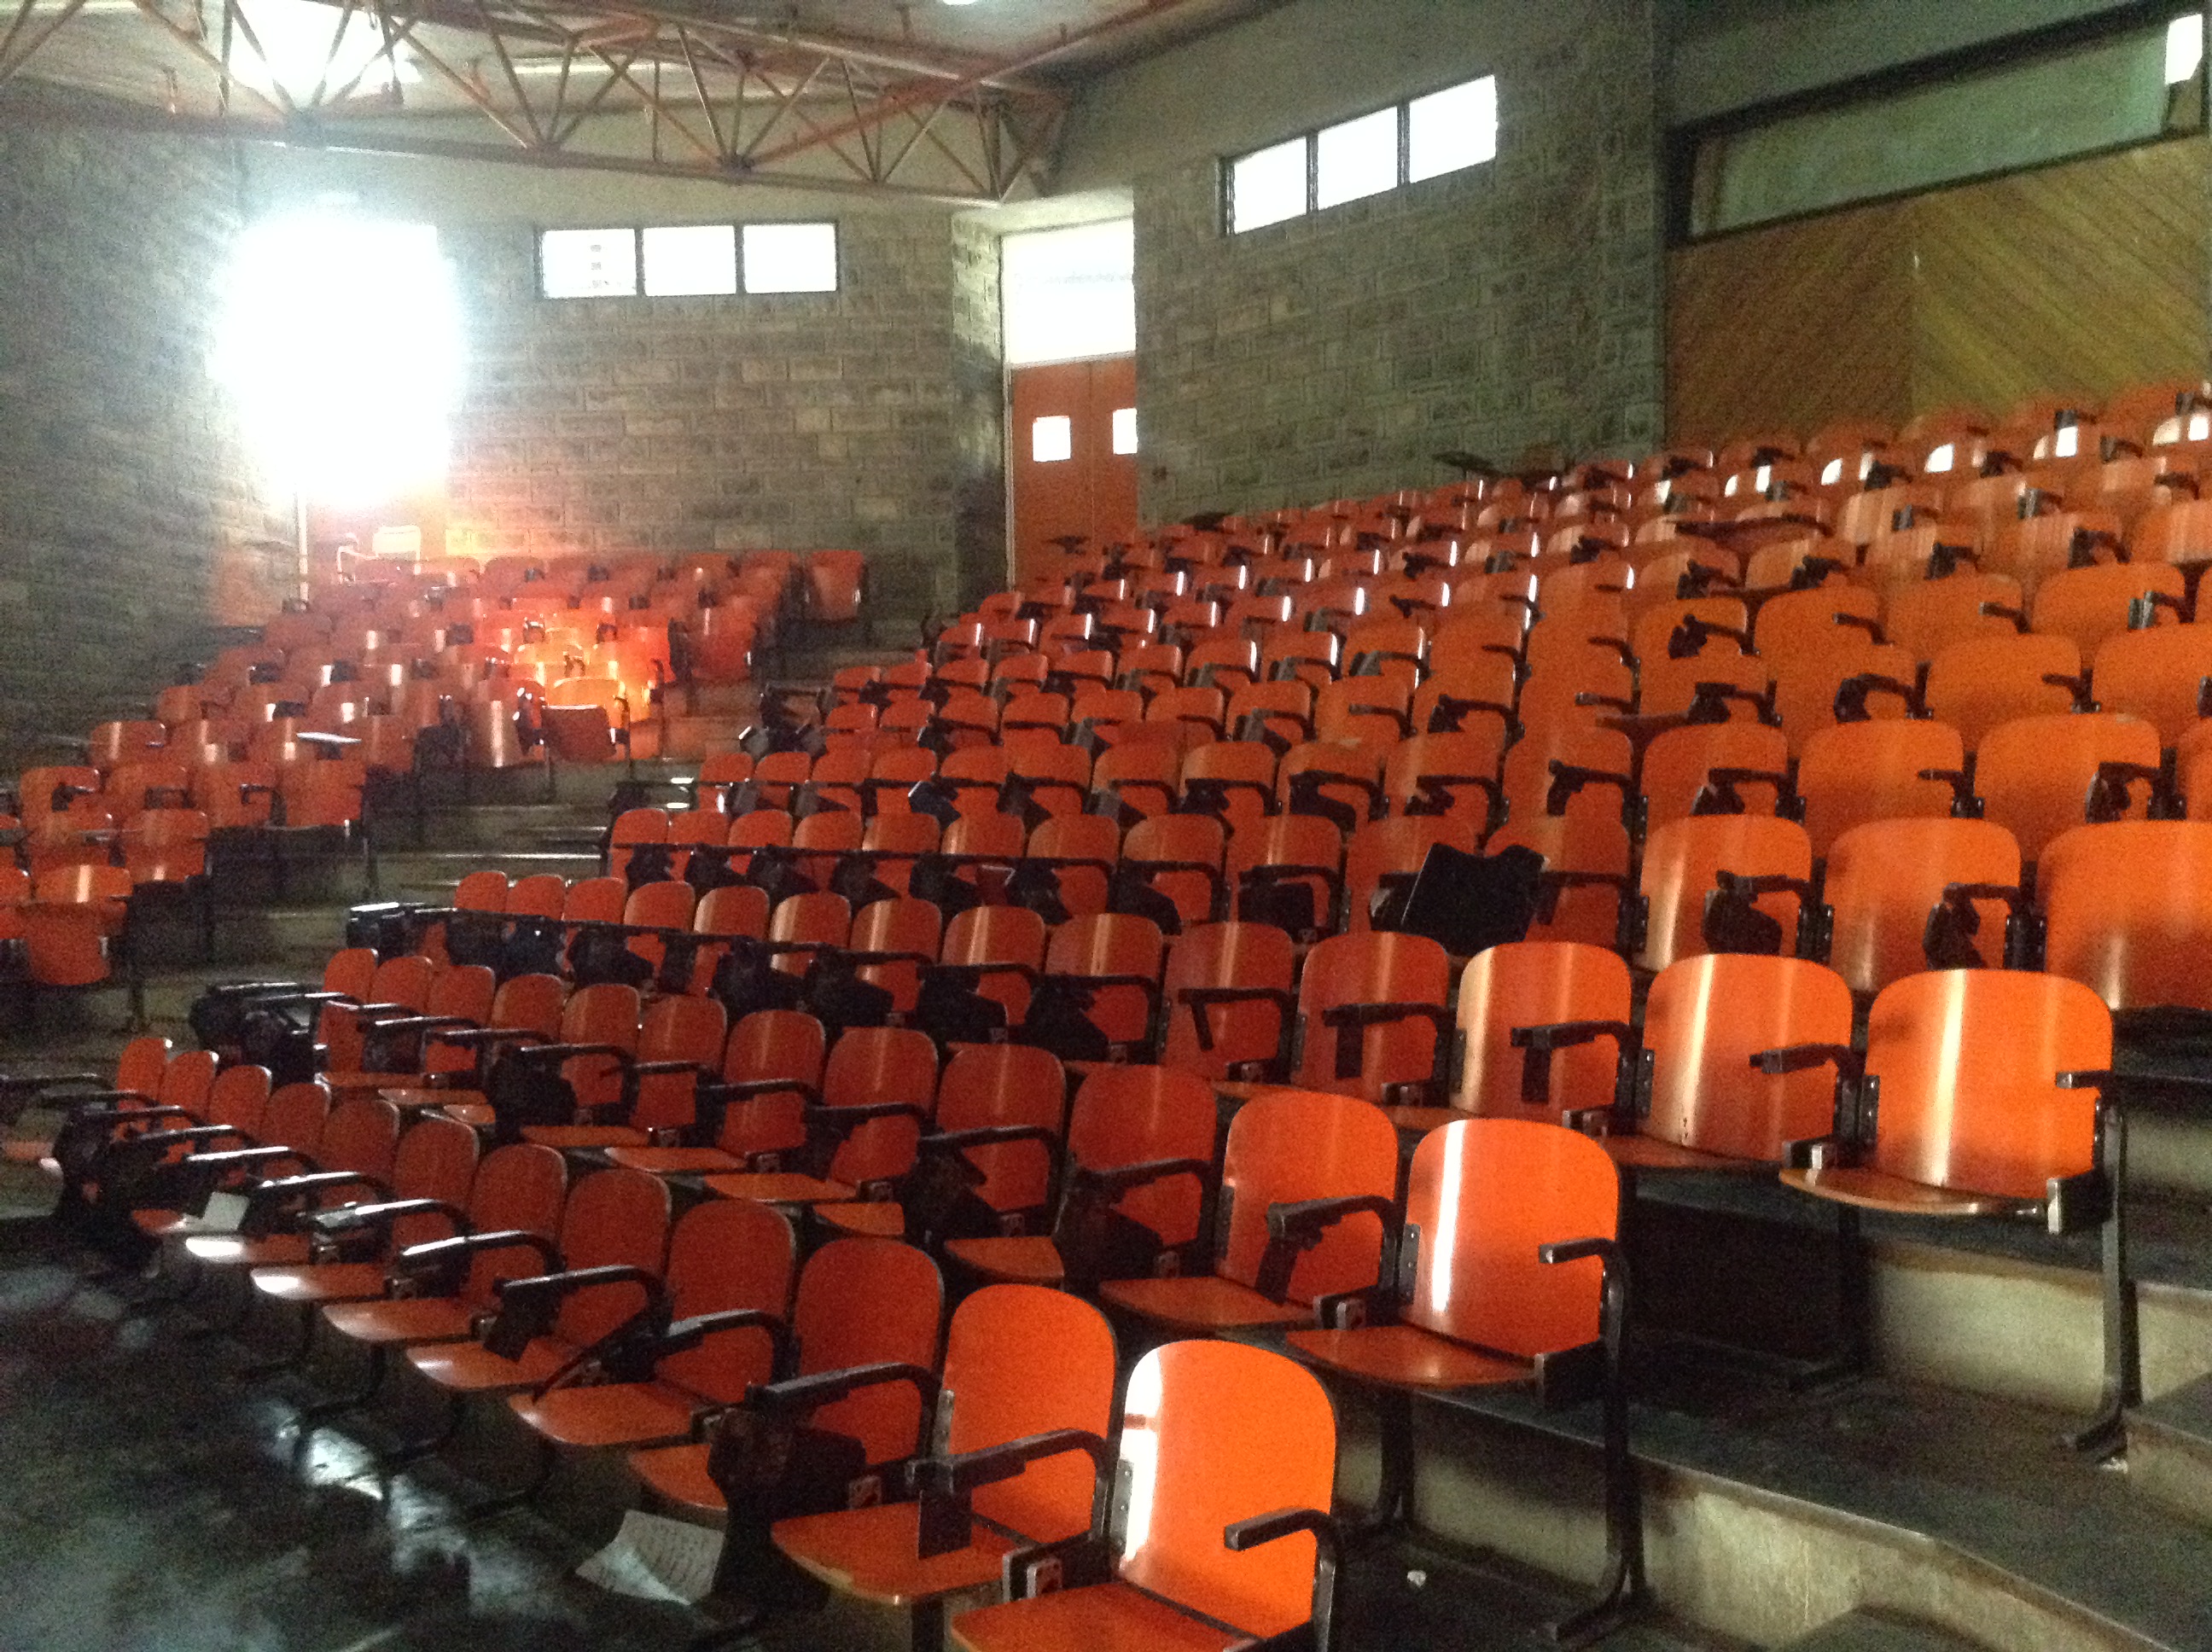 Classroom seating in Addis Ababa lecture hall